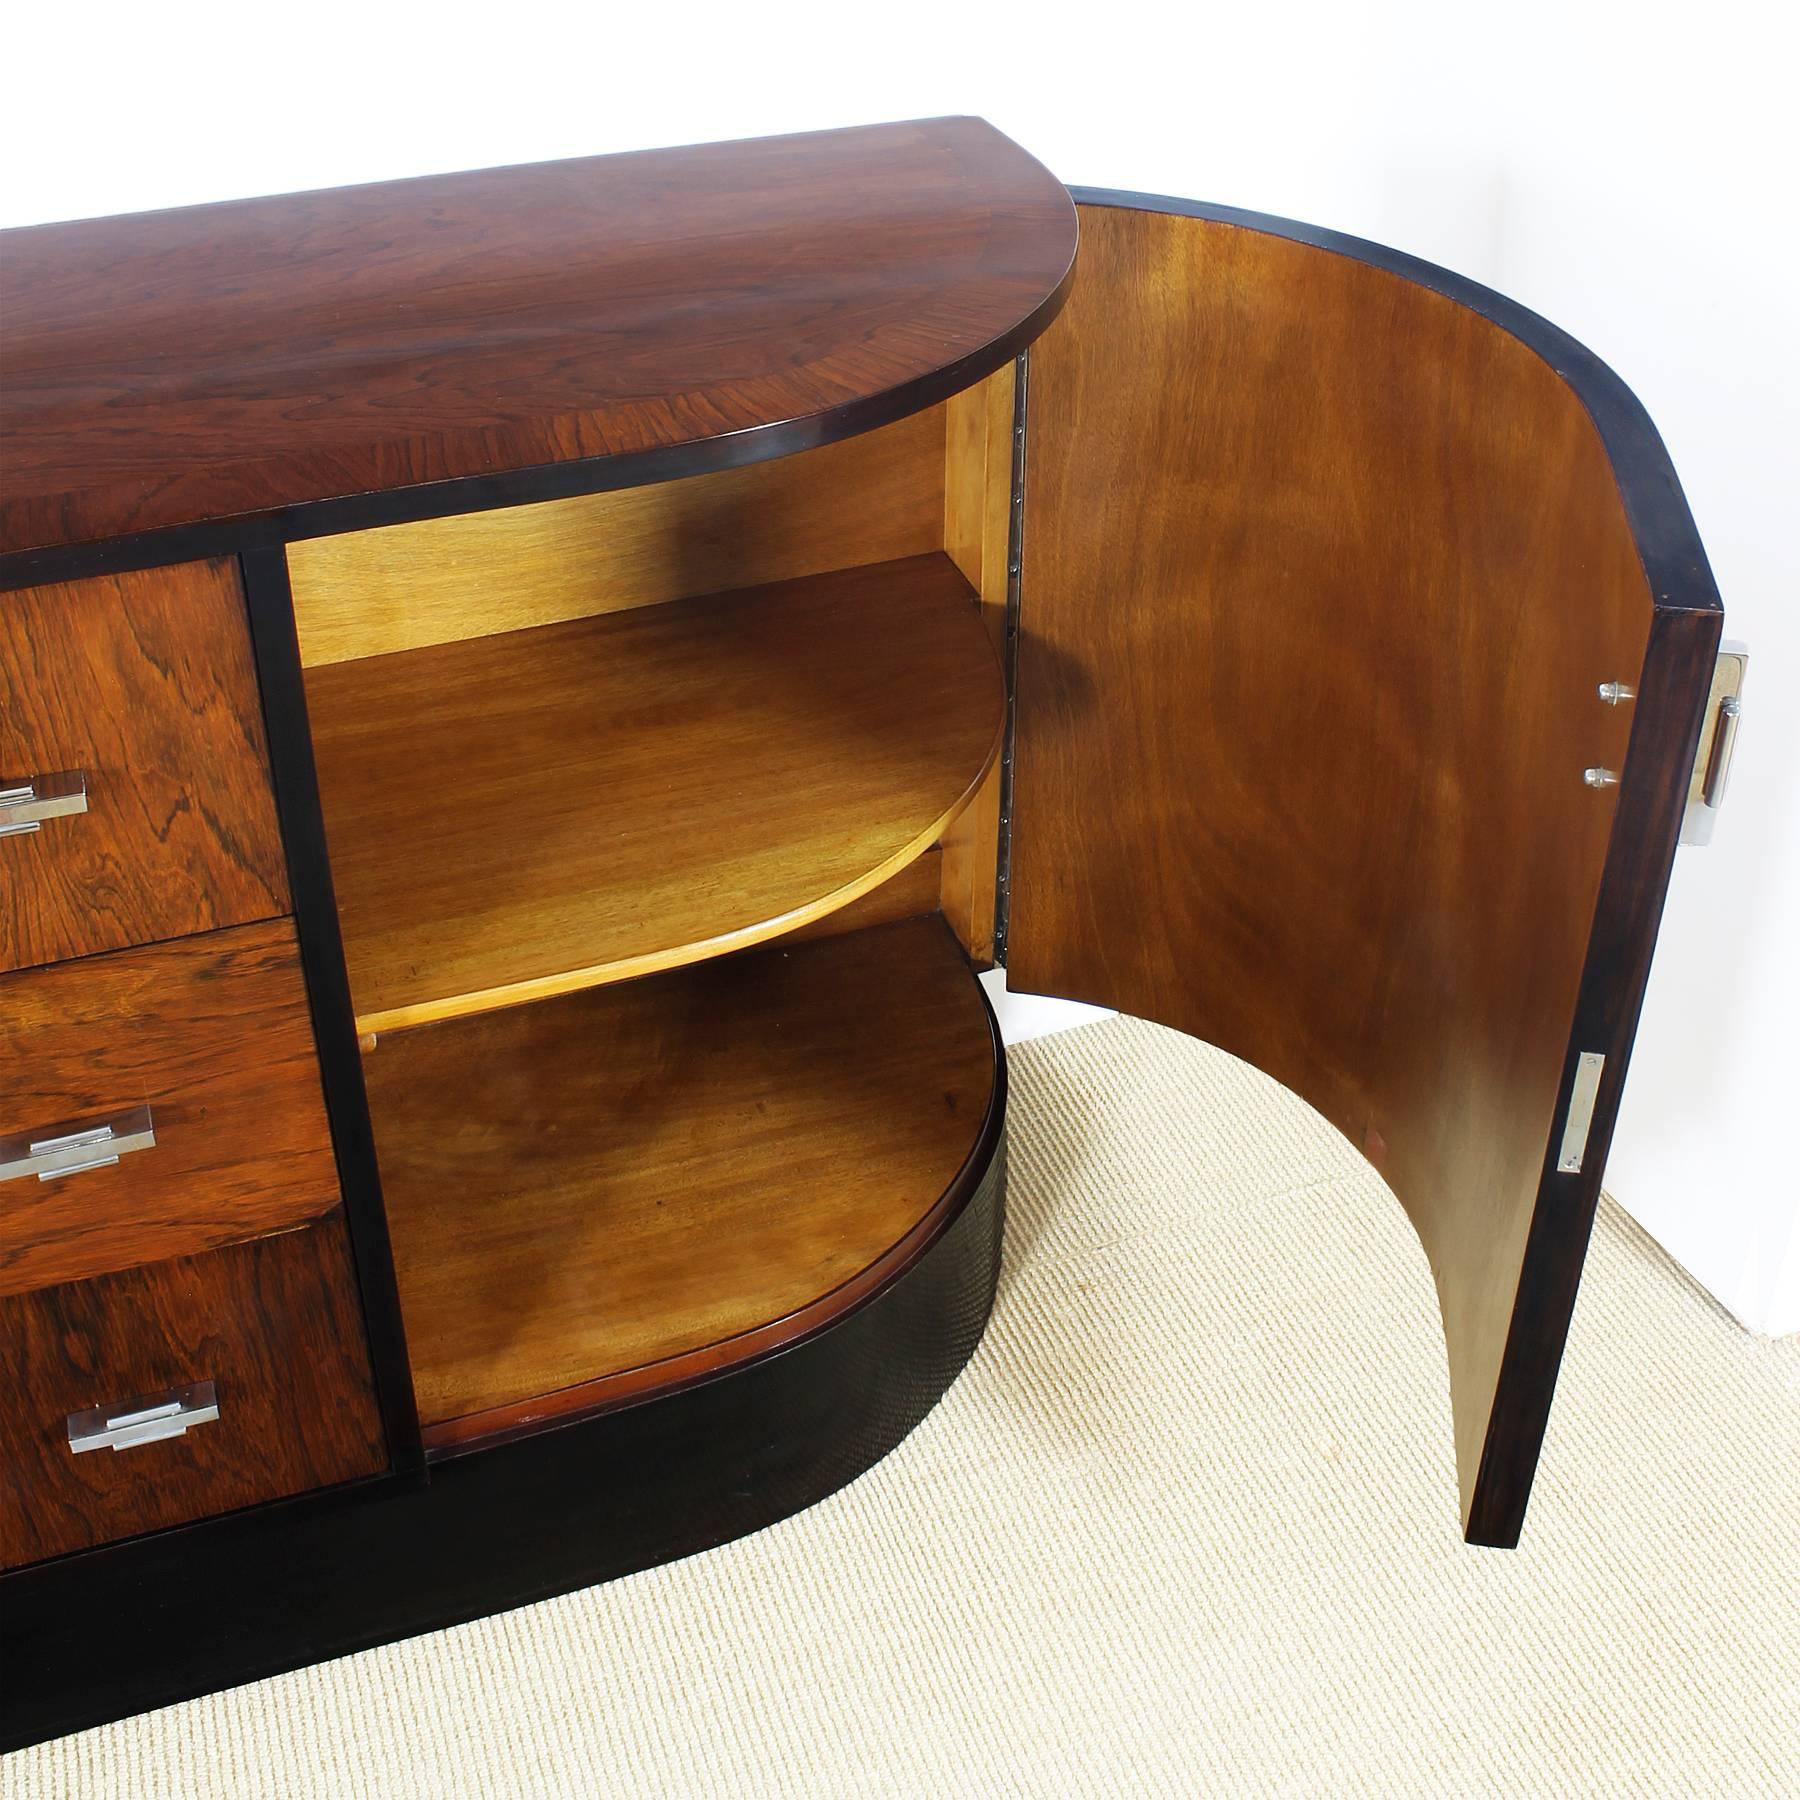 Brass 1934 - Curved Art Deco Sideboard by Casa Reig, mahogany, Rio rosewood - Spain